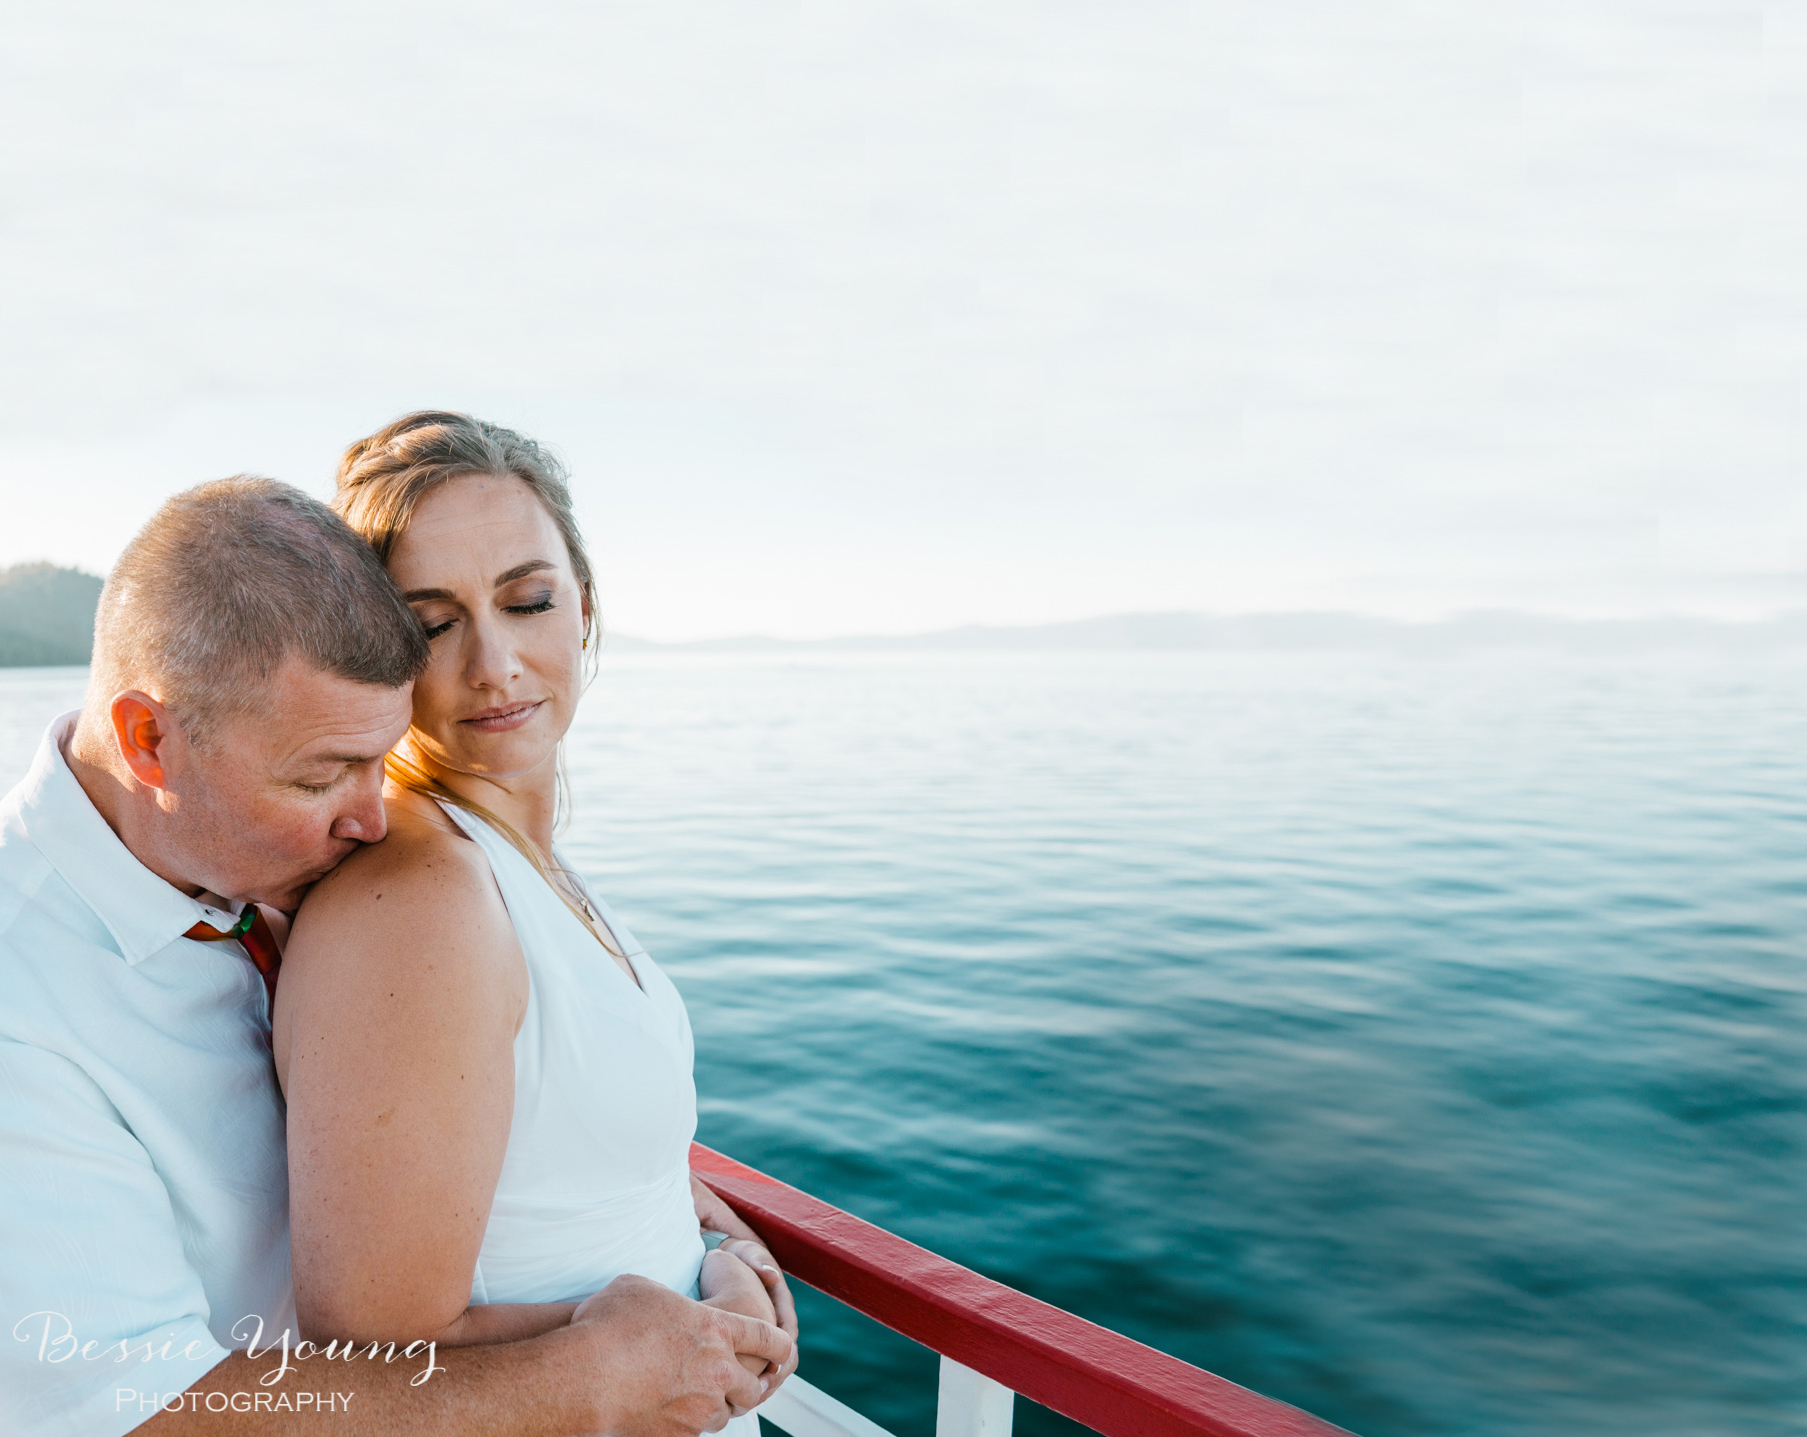 Tahoe Wedding by Bessie Young Photography 2018-41.jpg